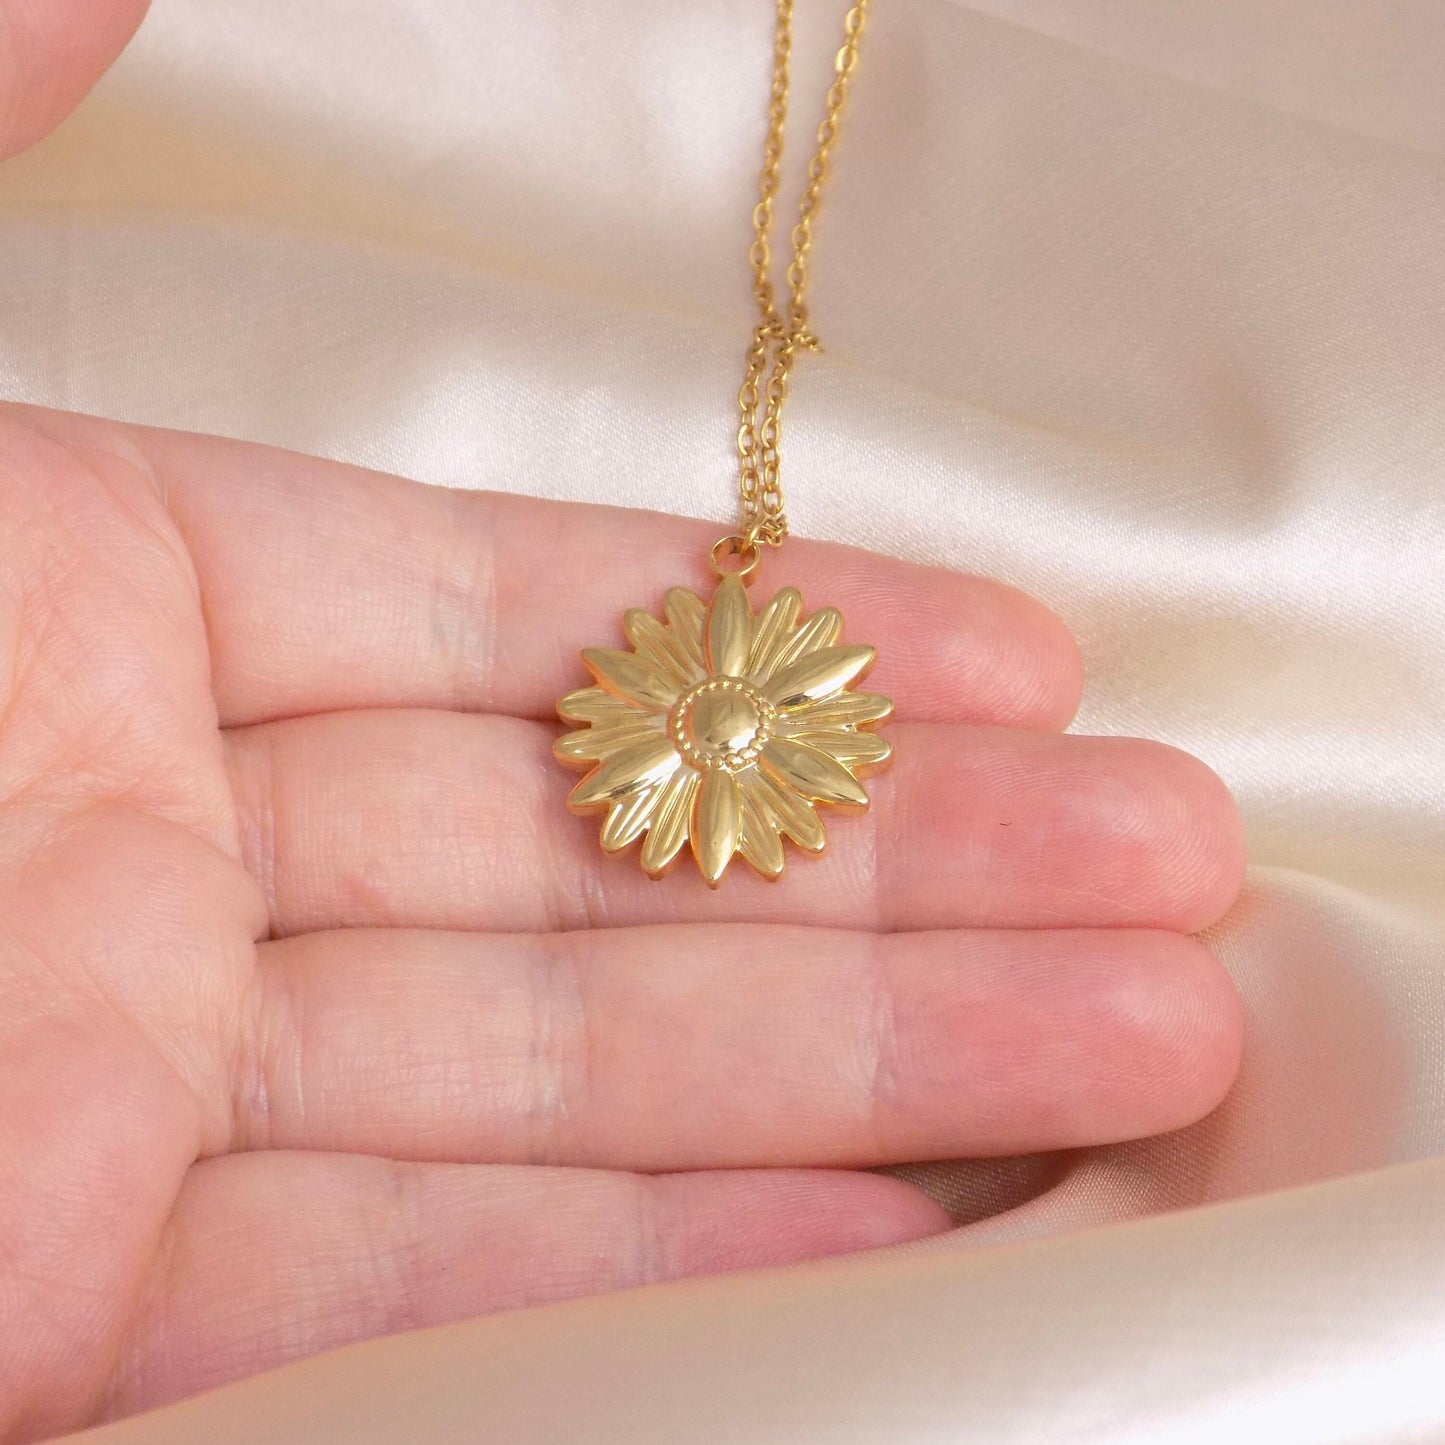 Gold Sunflower Necklace, 18K Gold Stainless Steel, Large Flower Charm For Her, M6-798